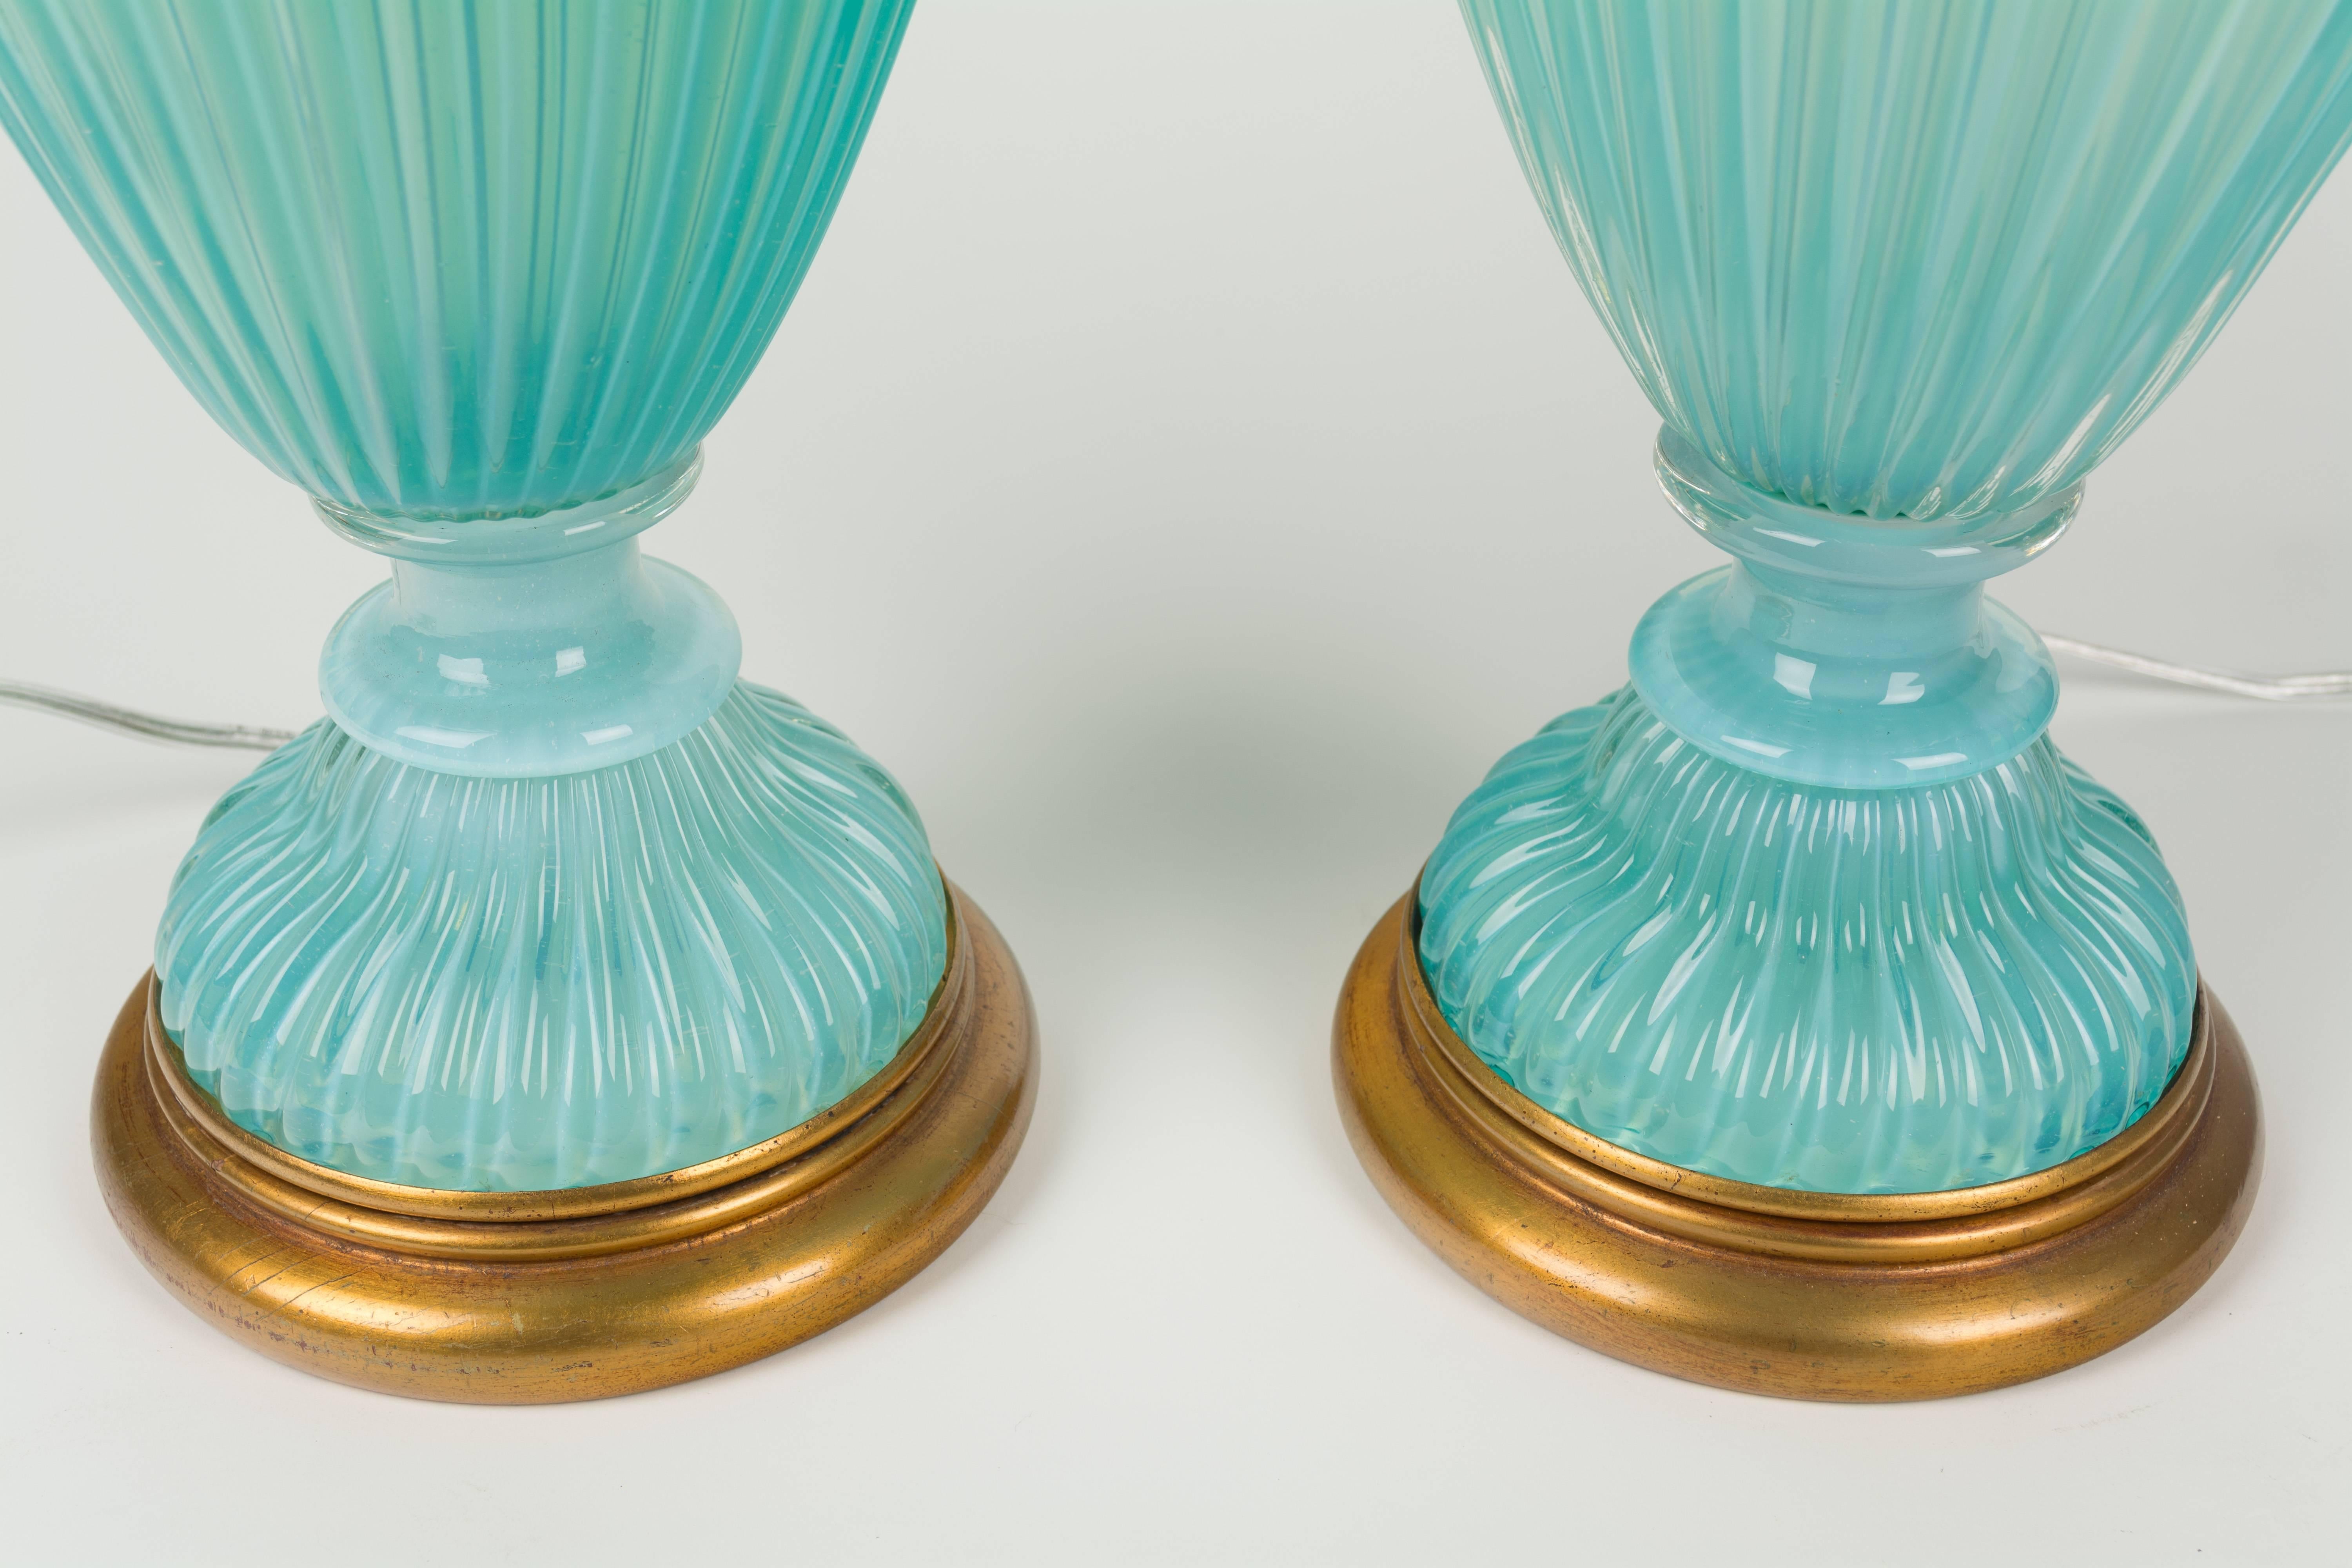 Pair of large aqua blue Murano glass table lamps by Archimede Seguso for The Marbro Lamp Company. Handblown glass is in three parts with ribbed body. Gorgeous opalescent color is similar to Tiffany blue. Elegant Hollywood Regency style with gold